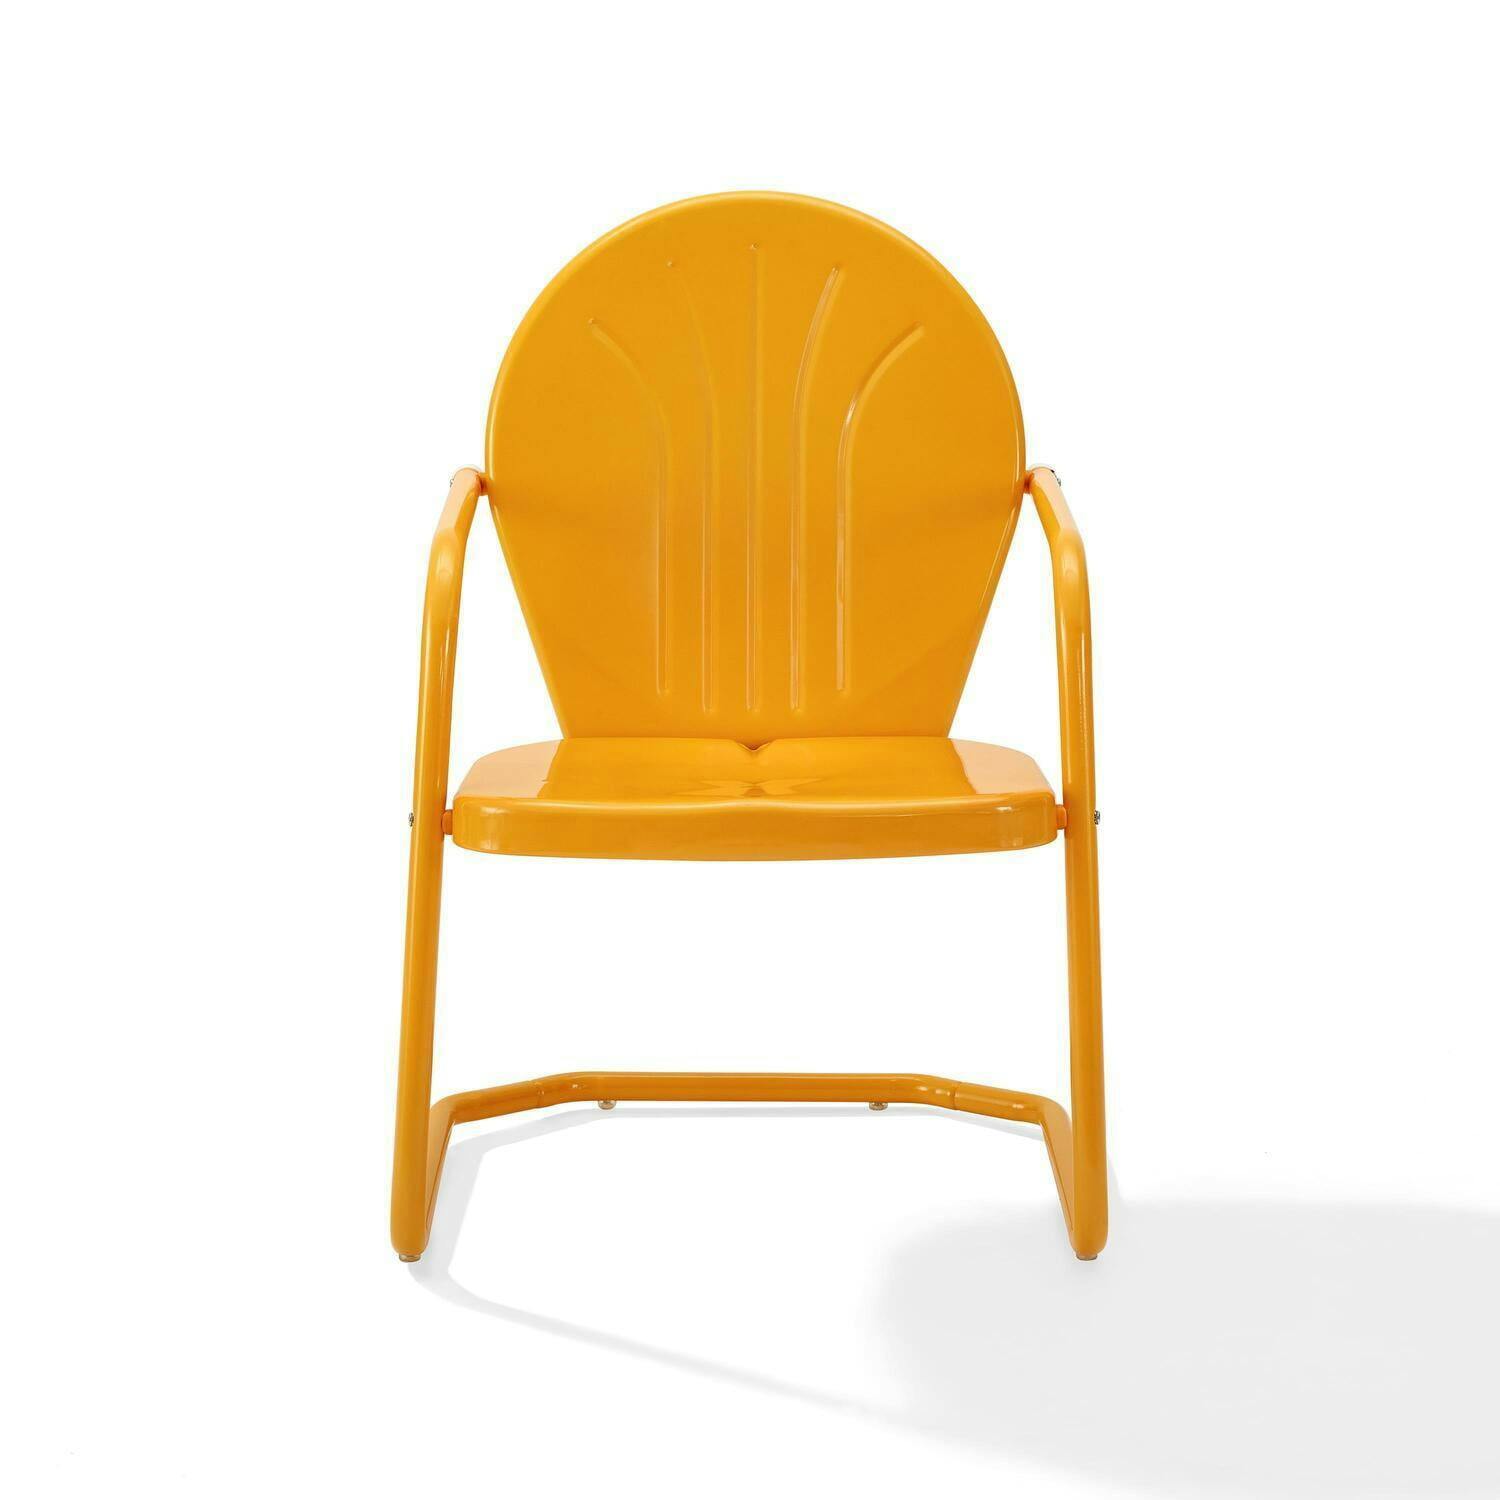 Griffith Tangerine Gloss Steel Outdoor Armchair with Decorative Grooves